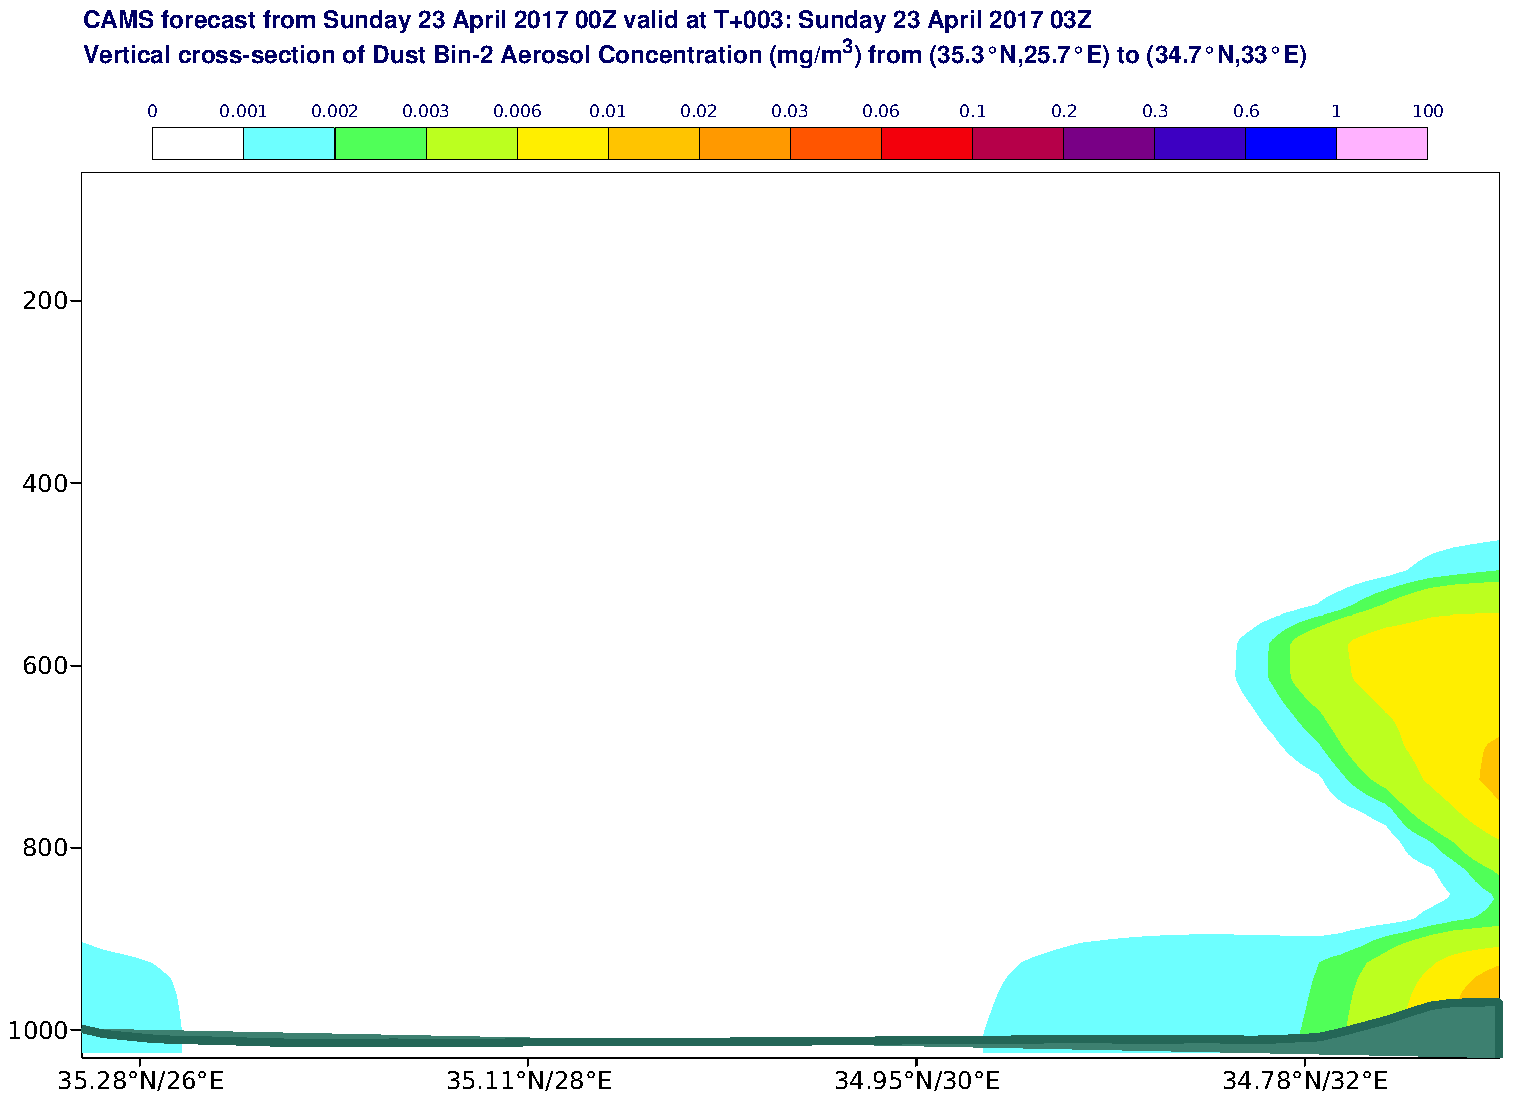 Vertical cross-section of Dust Bin-2 Aerosol Concentration (mg/m3) valid at T3 - 2017-04-23 03:00